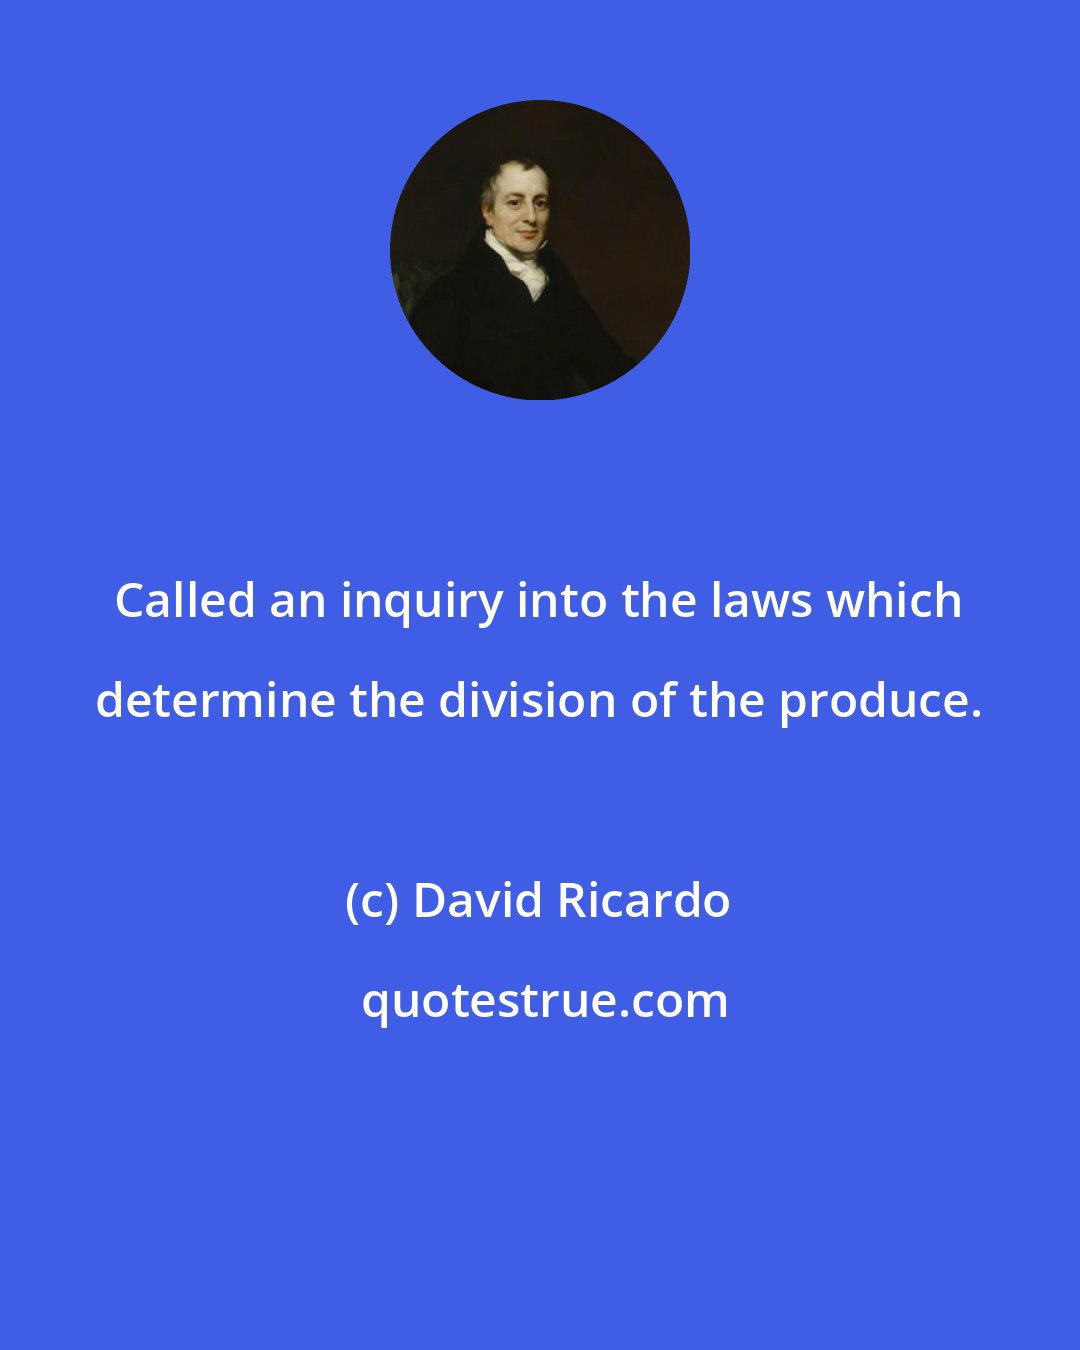 David Ricardo: Called an inquiry into the laws which determine the division of the produce.